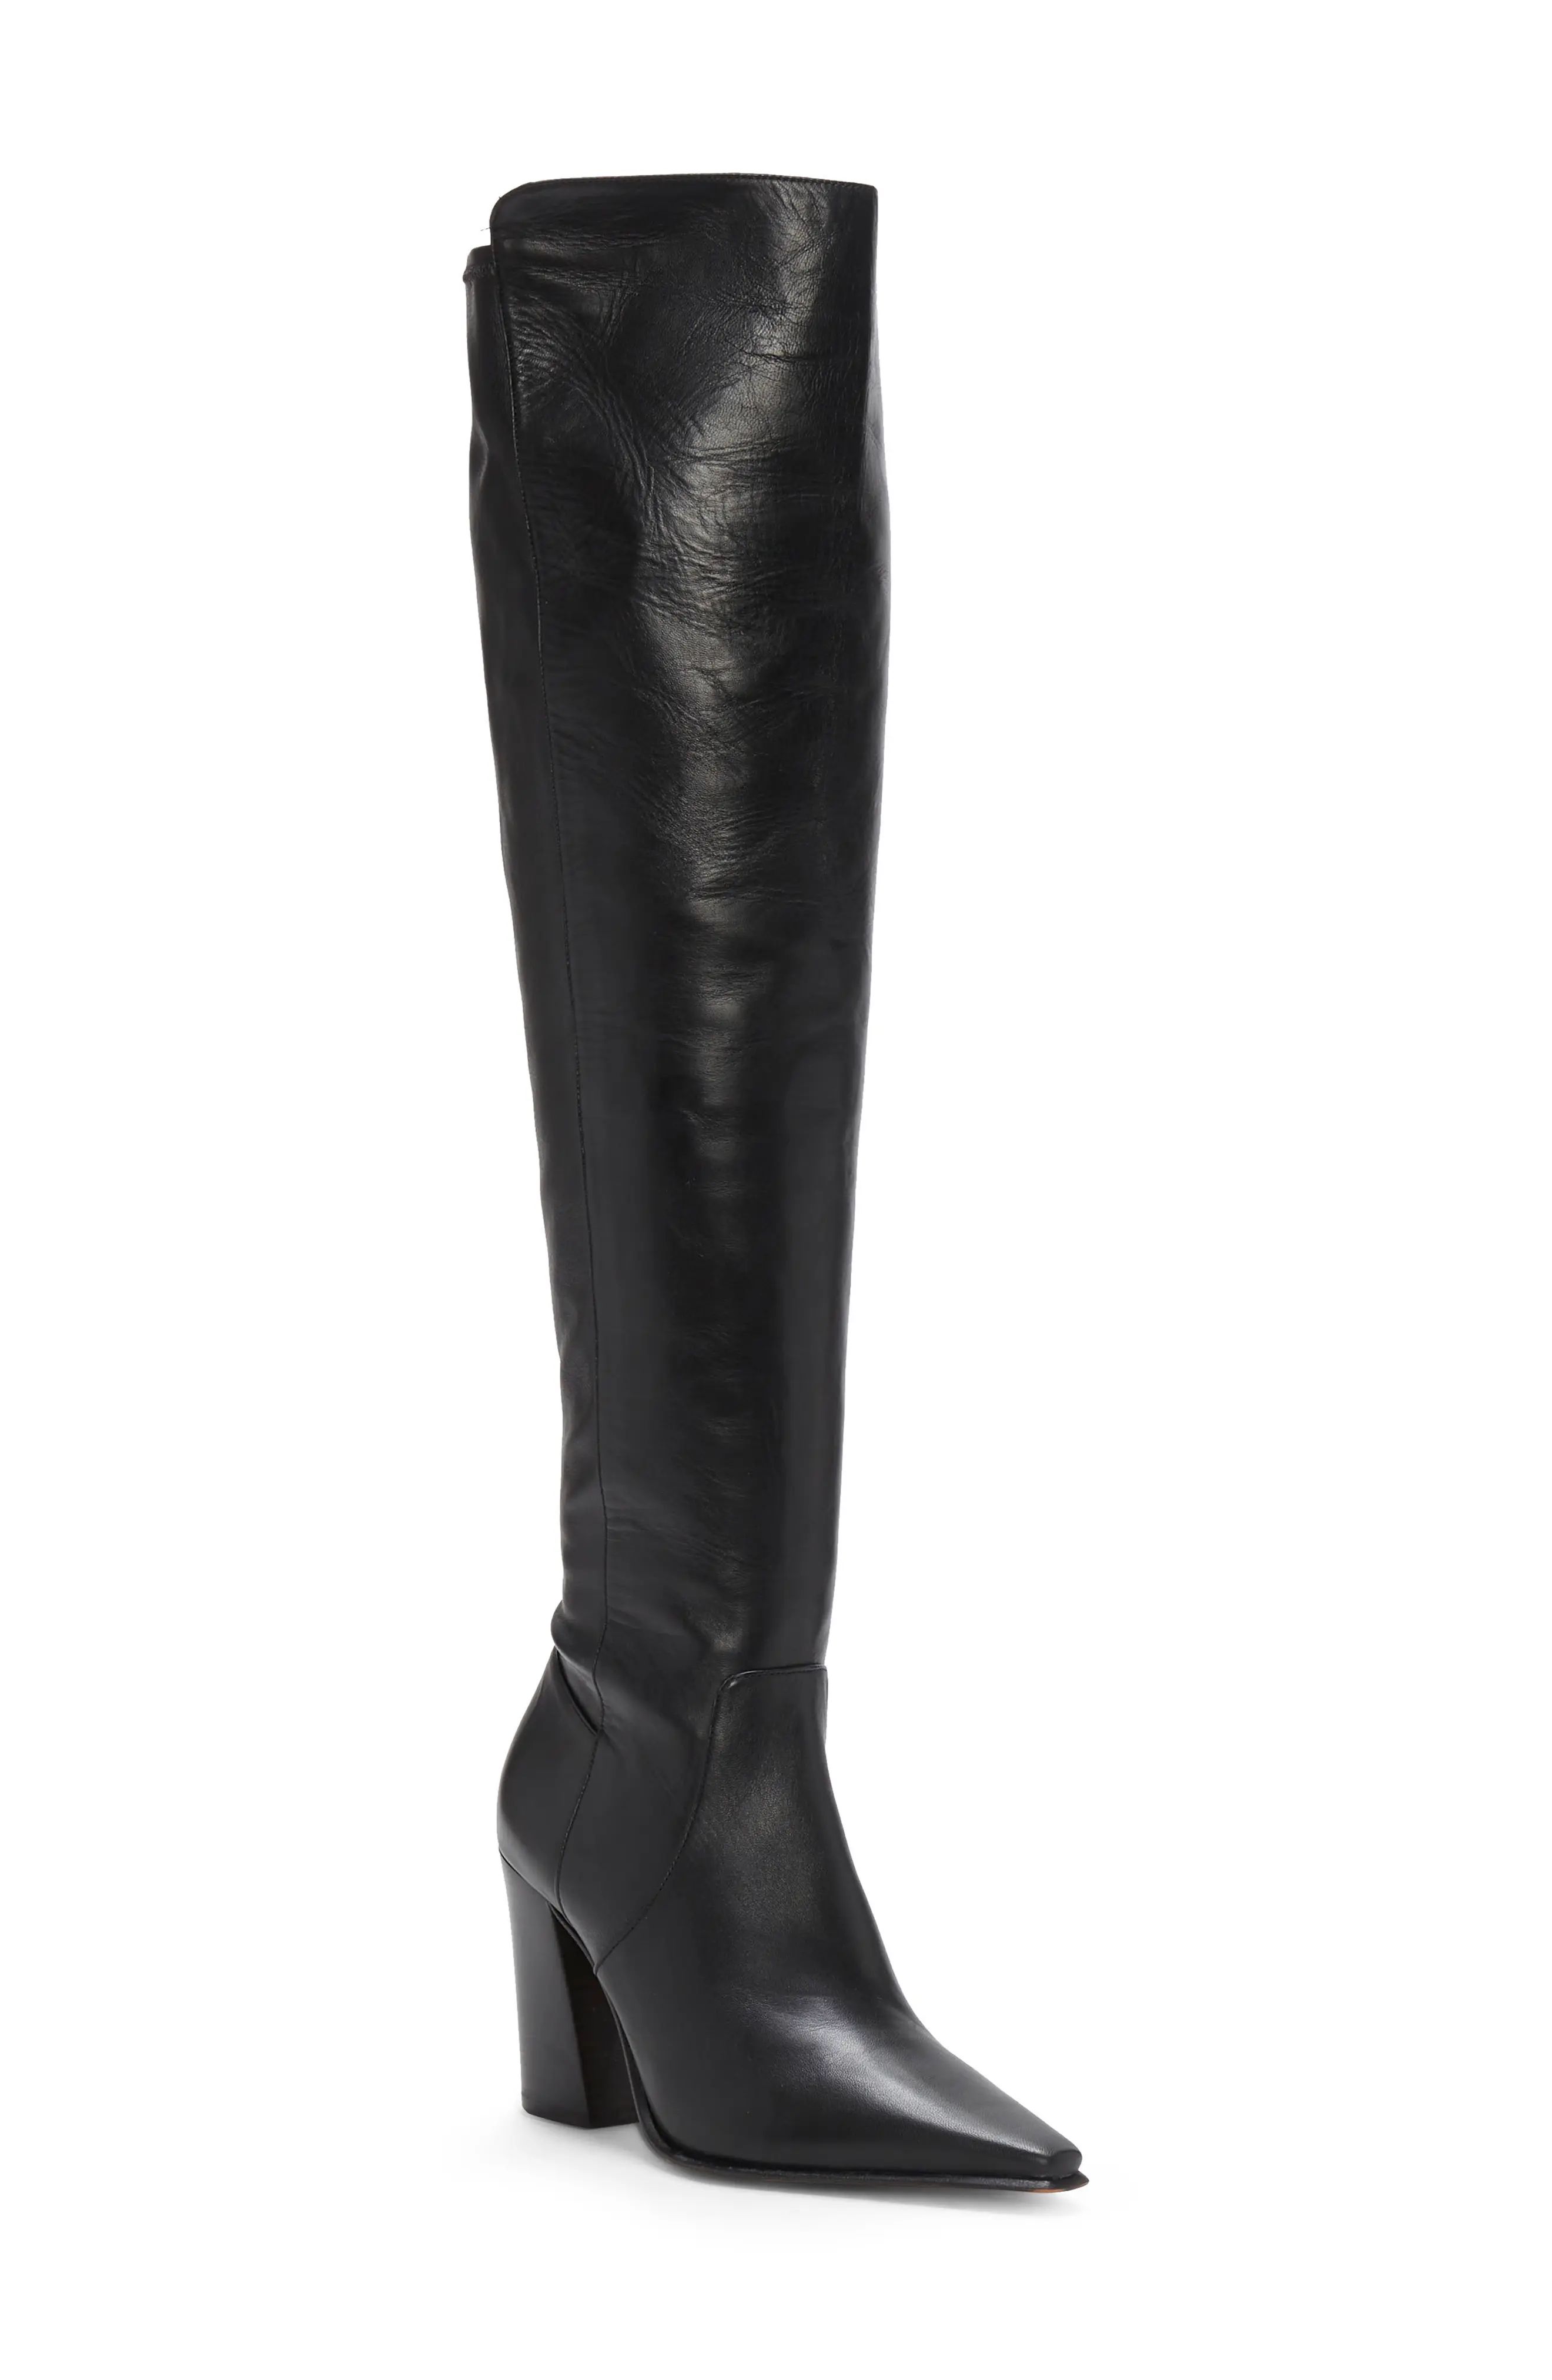 Vince Camuto Demerri Over the Knee Boot, Size 5 in Black at Nordstrom | Nordstrom